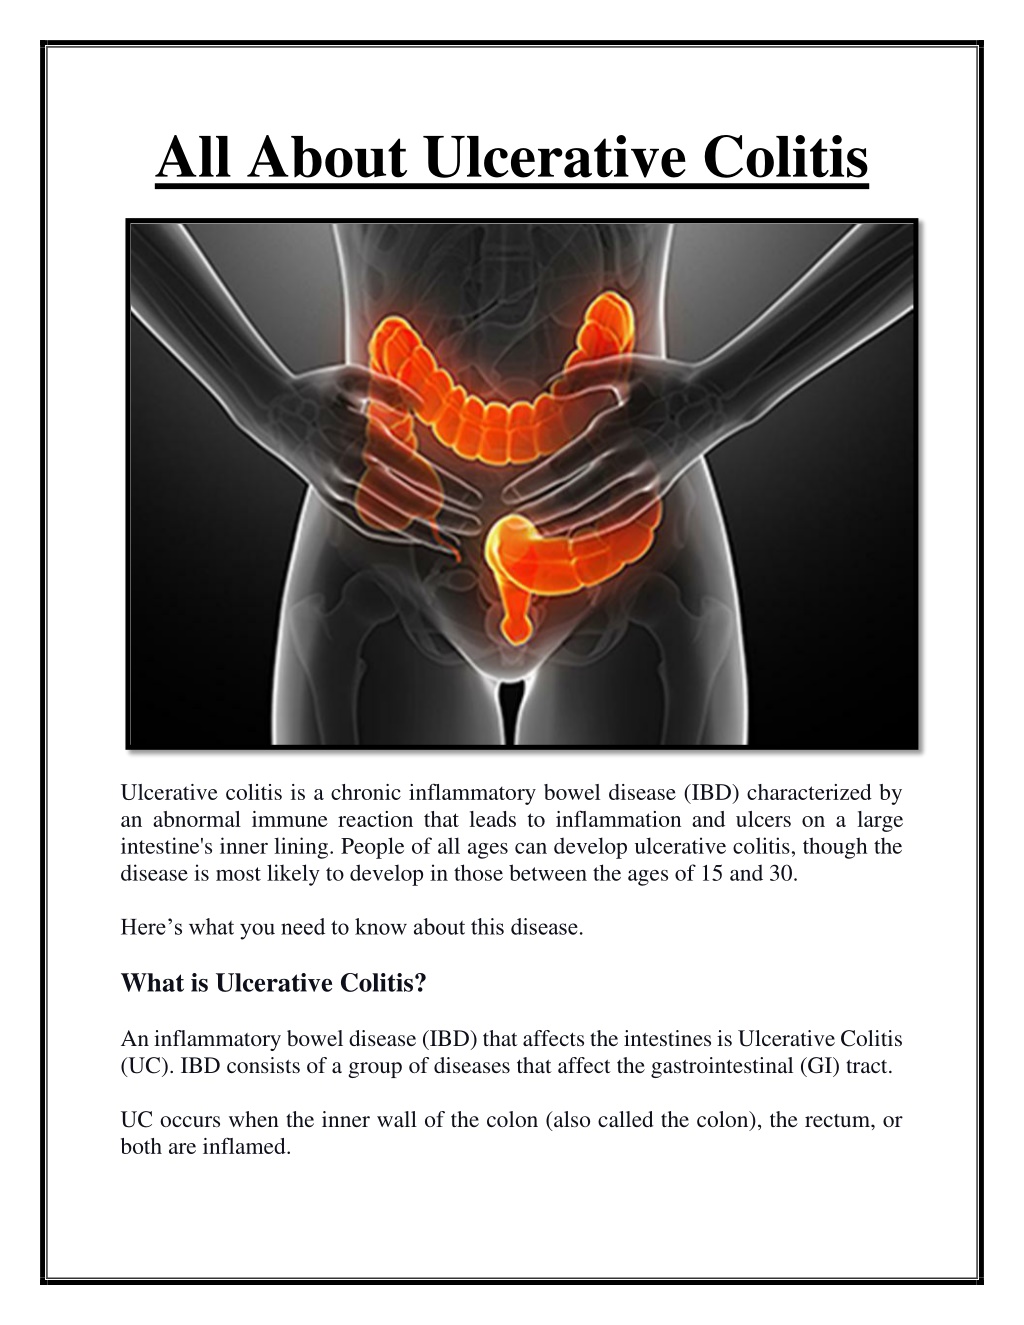 Ppt All About Ulcerative Colitis Powerpoint Presentation Free Download Id11410165 9659